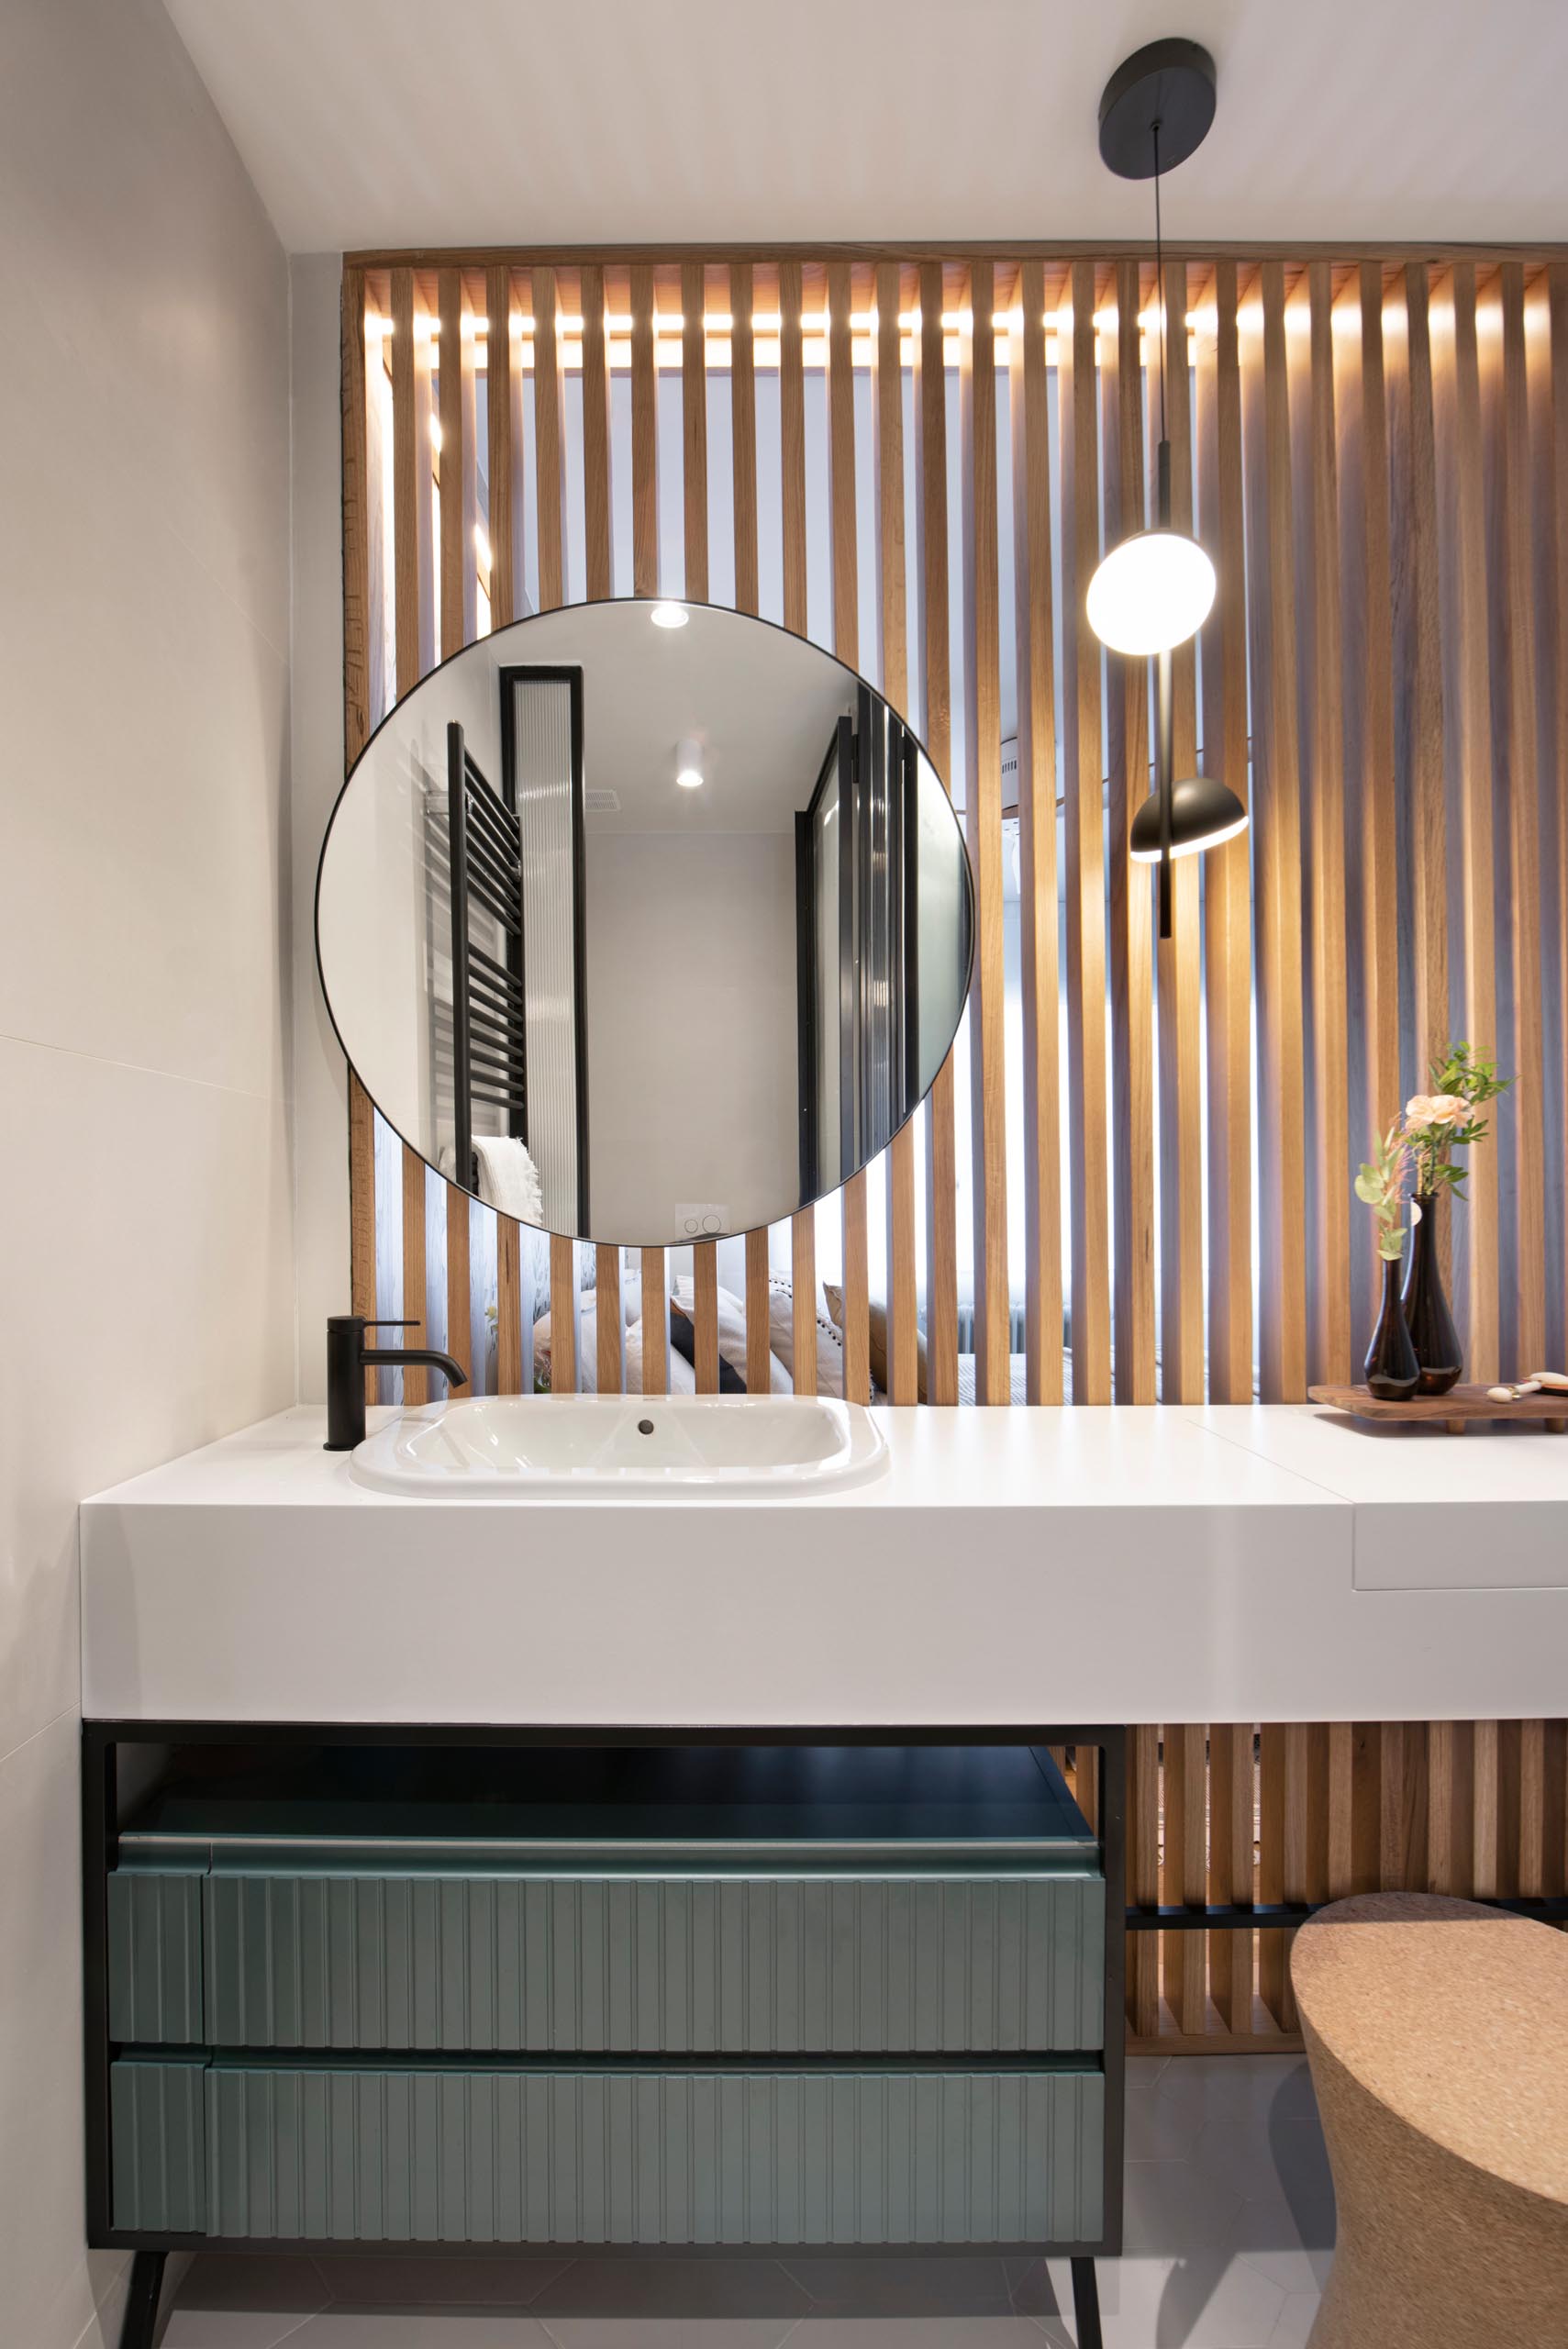 This en-suite bathroom is separated from the bedroom by a wood slat wall, while black framed glass walls hide the shower and toilet, and the vanity has a thick white countertop that hides a makeup area.